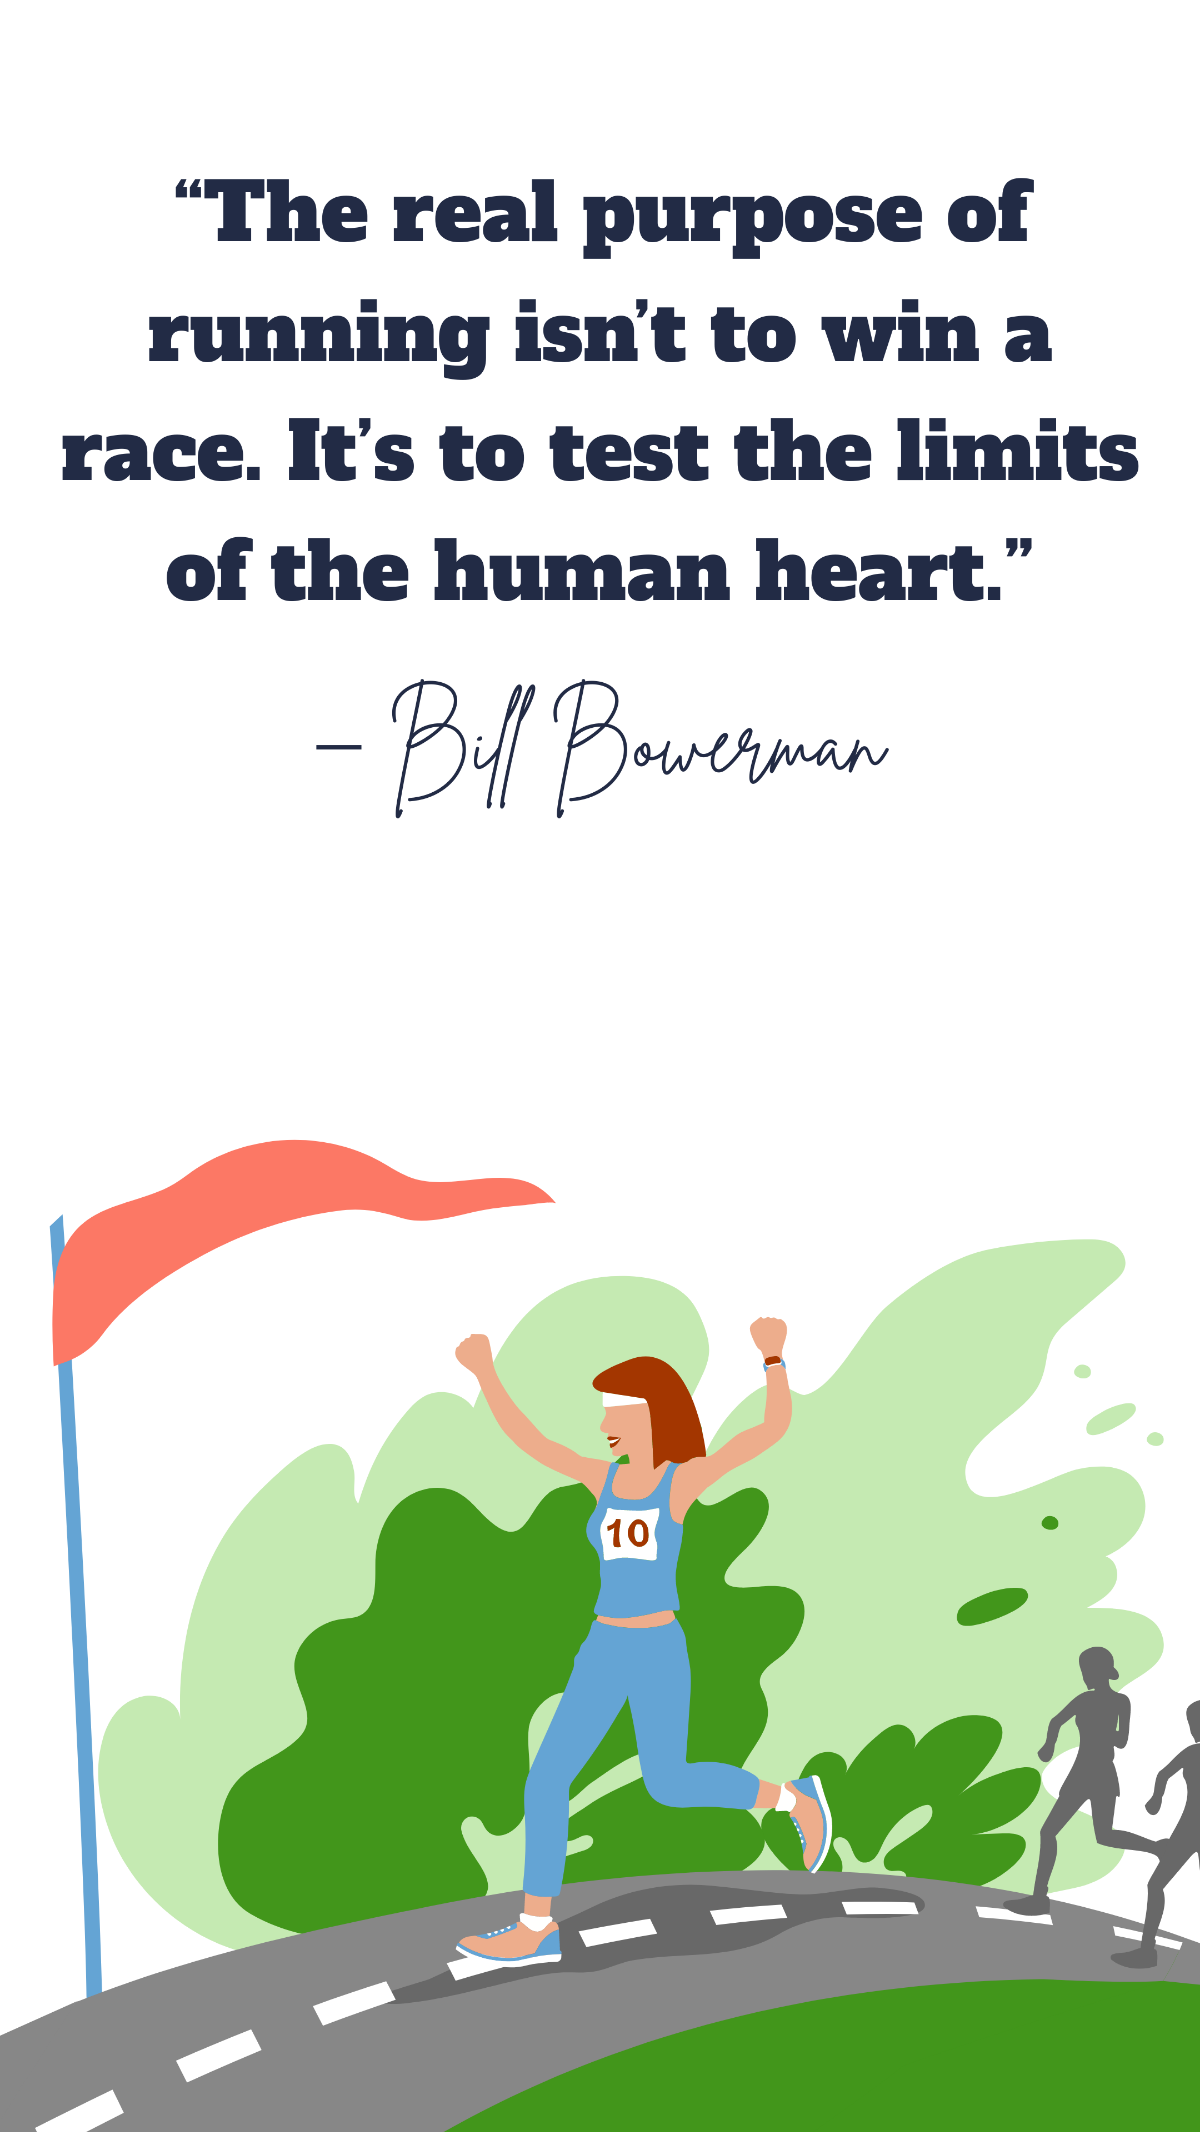 Bill Bowerman-The real purpose of running isn’t to win a race. It’s to test the limits of the human heart. Template